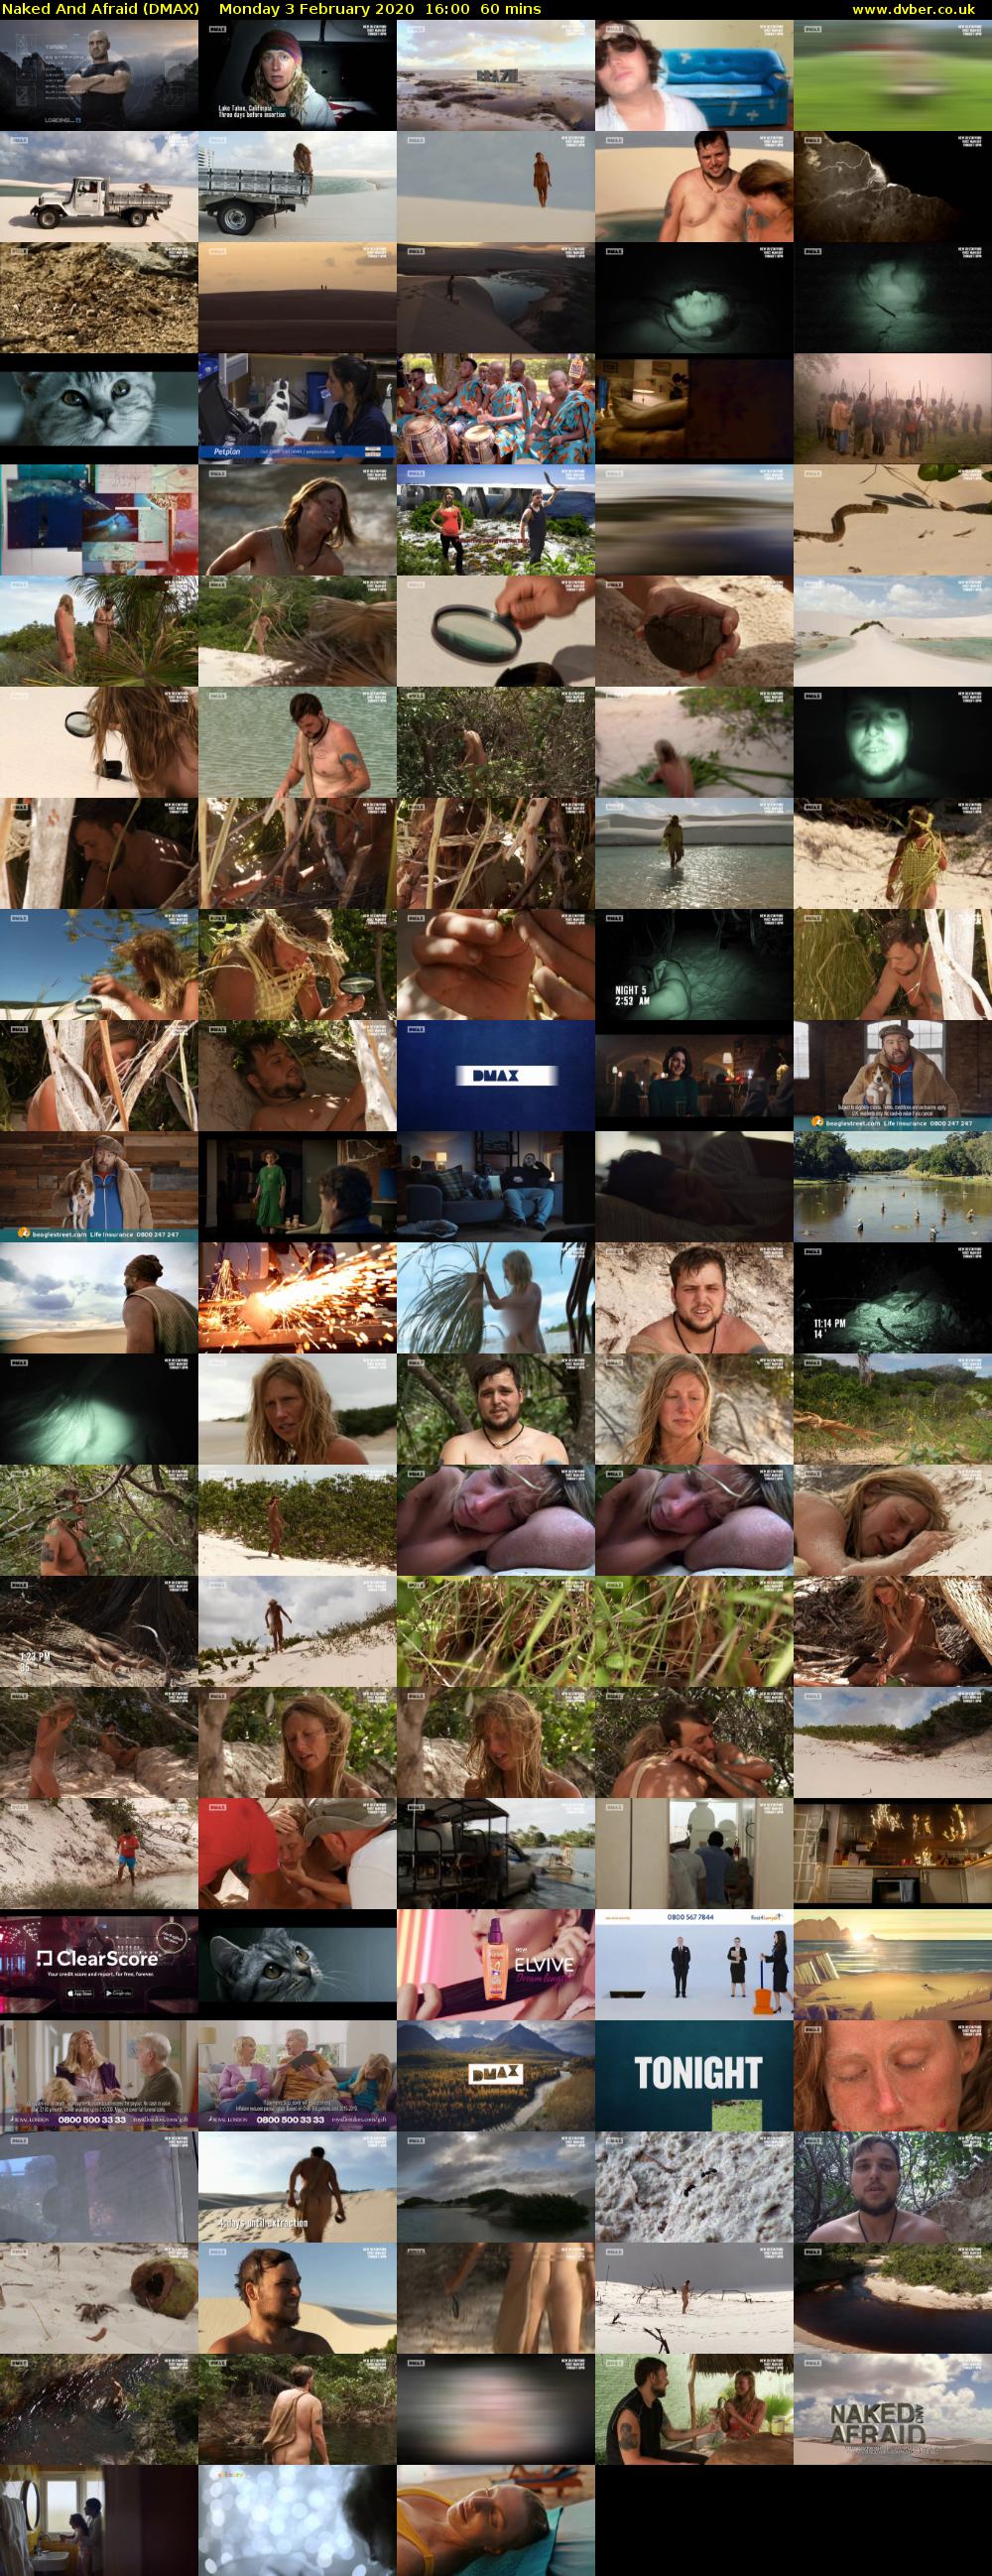 Naked And Afraid (DMAX) Monday 3 February 2020 16:00 - 17:00